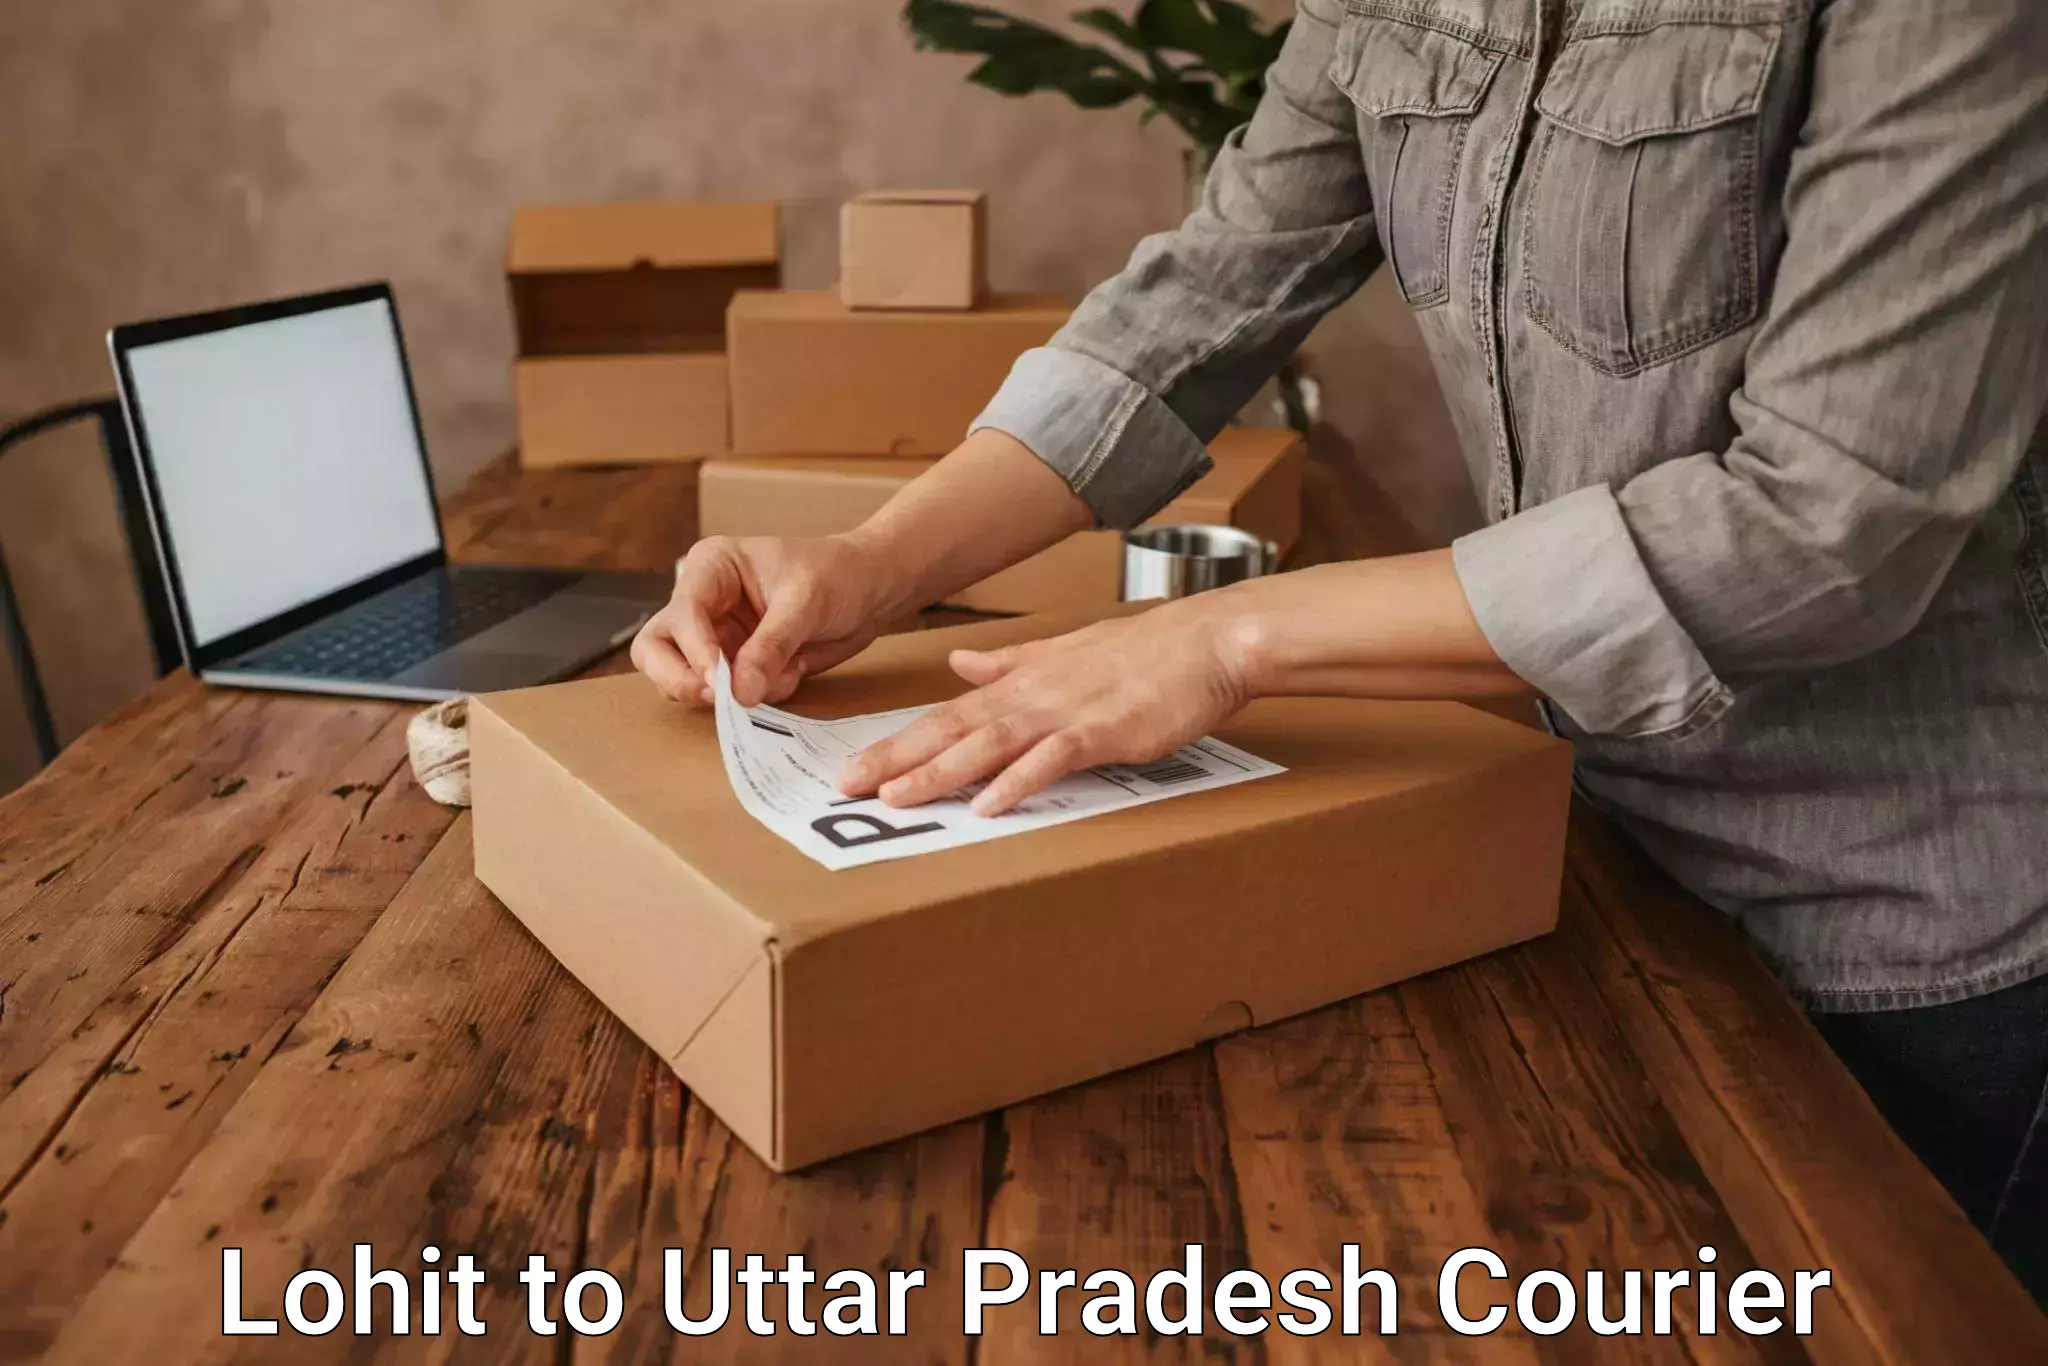 Automated parcel services Lohit to Uttar Pradesh